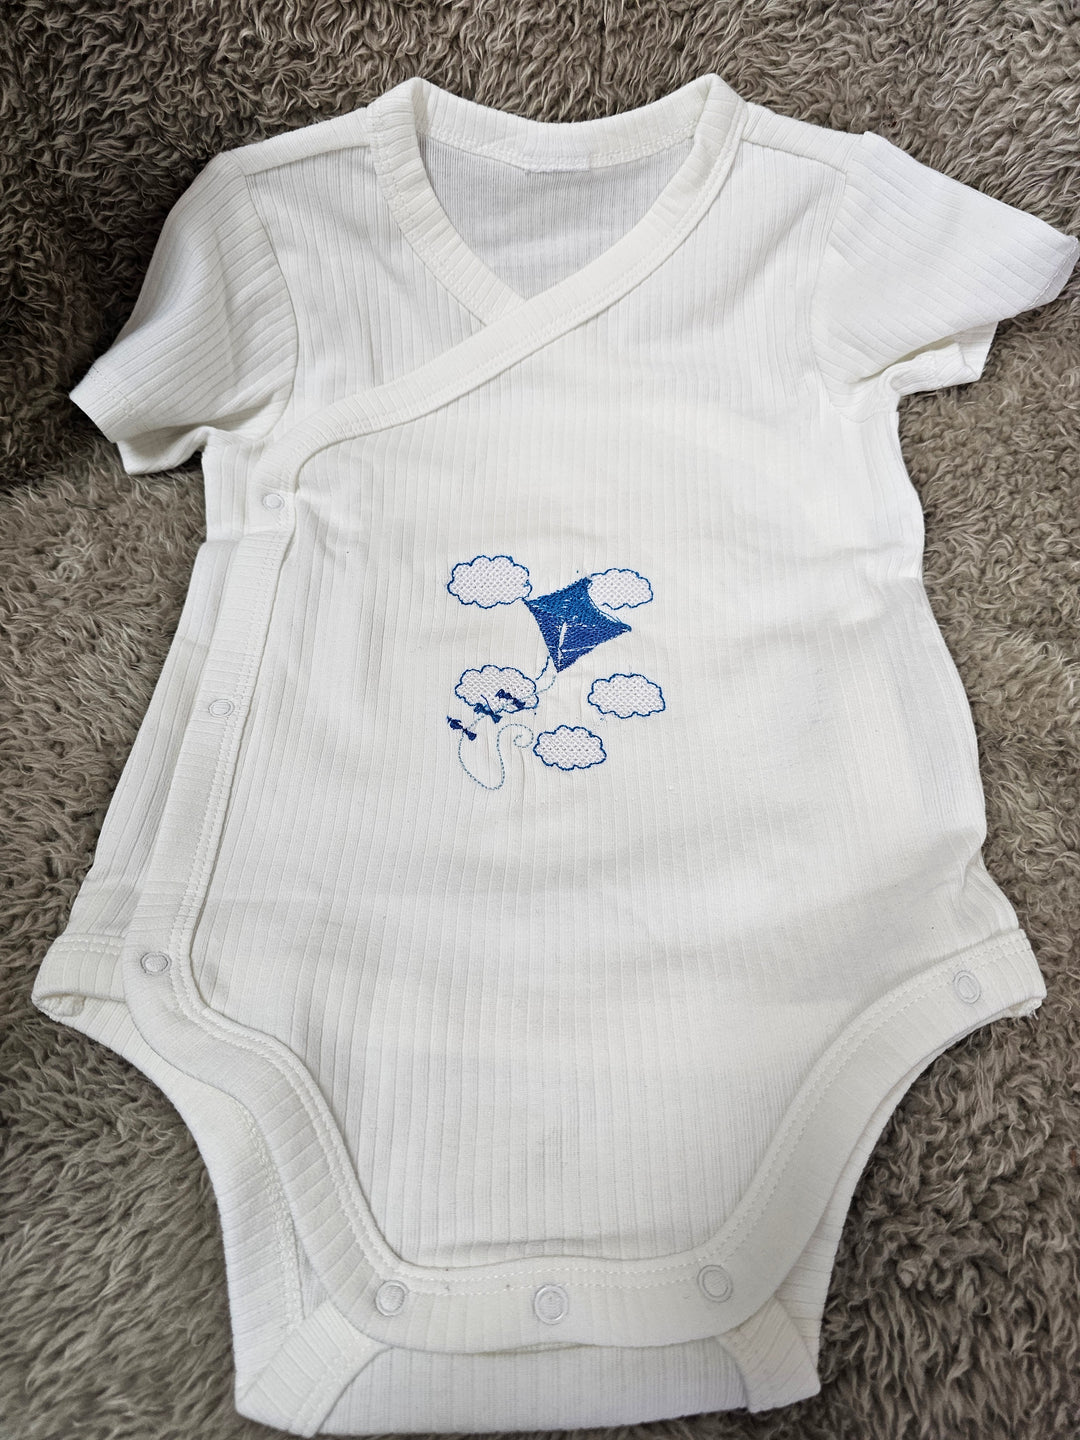 1431649 Embroidered Baby Onsie